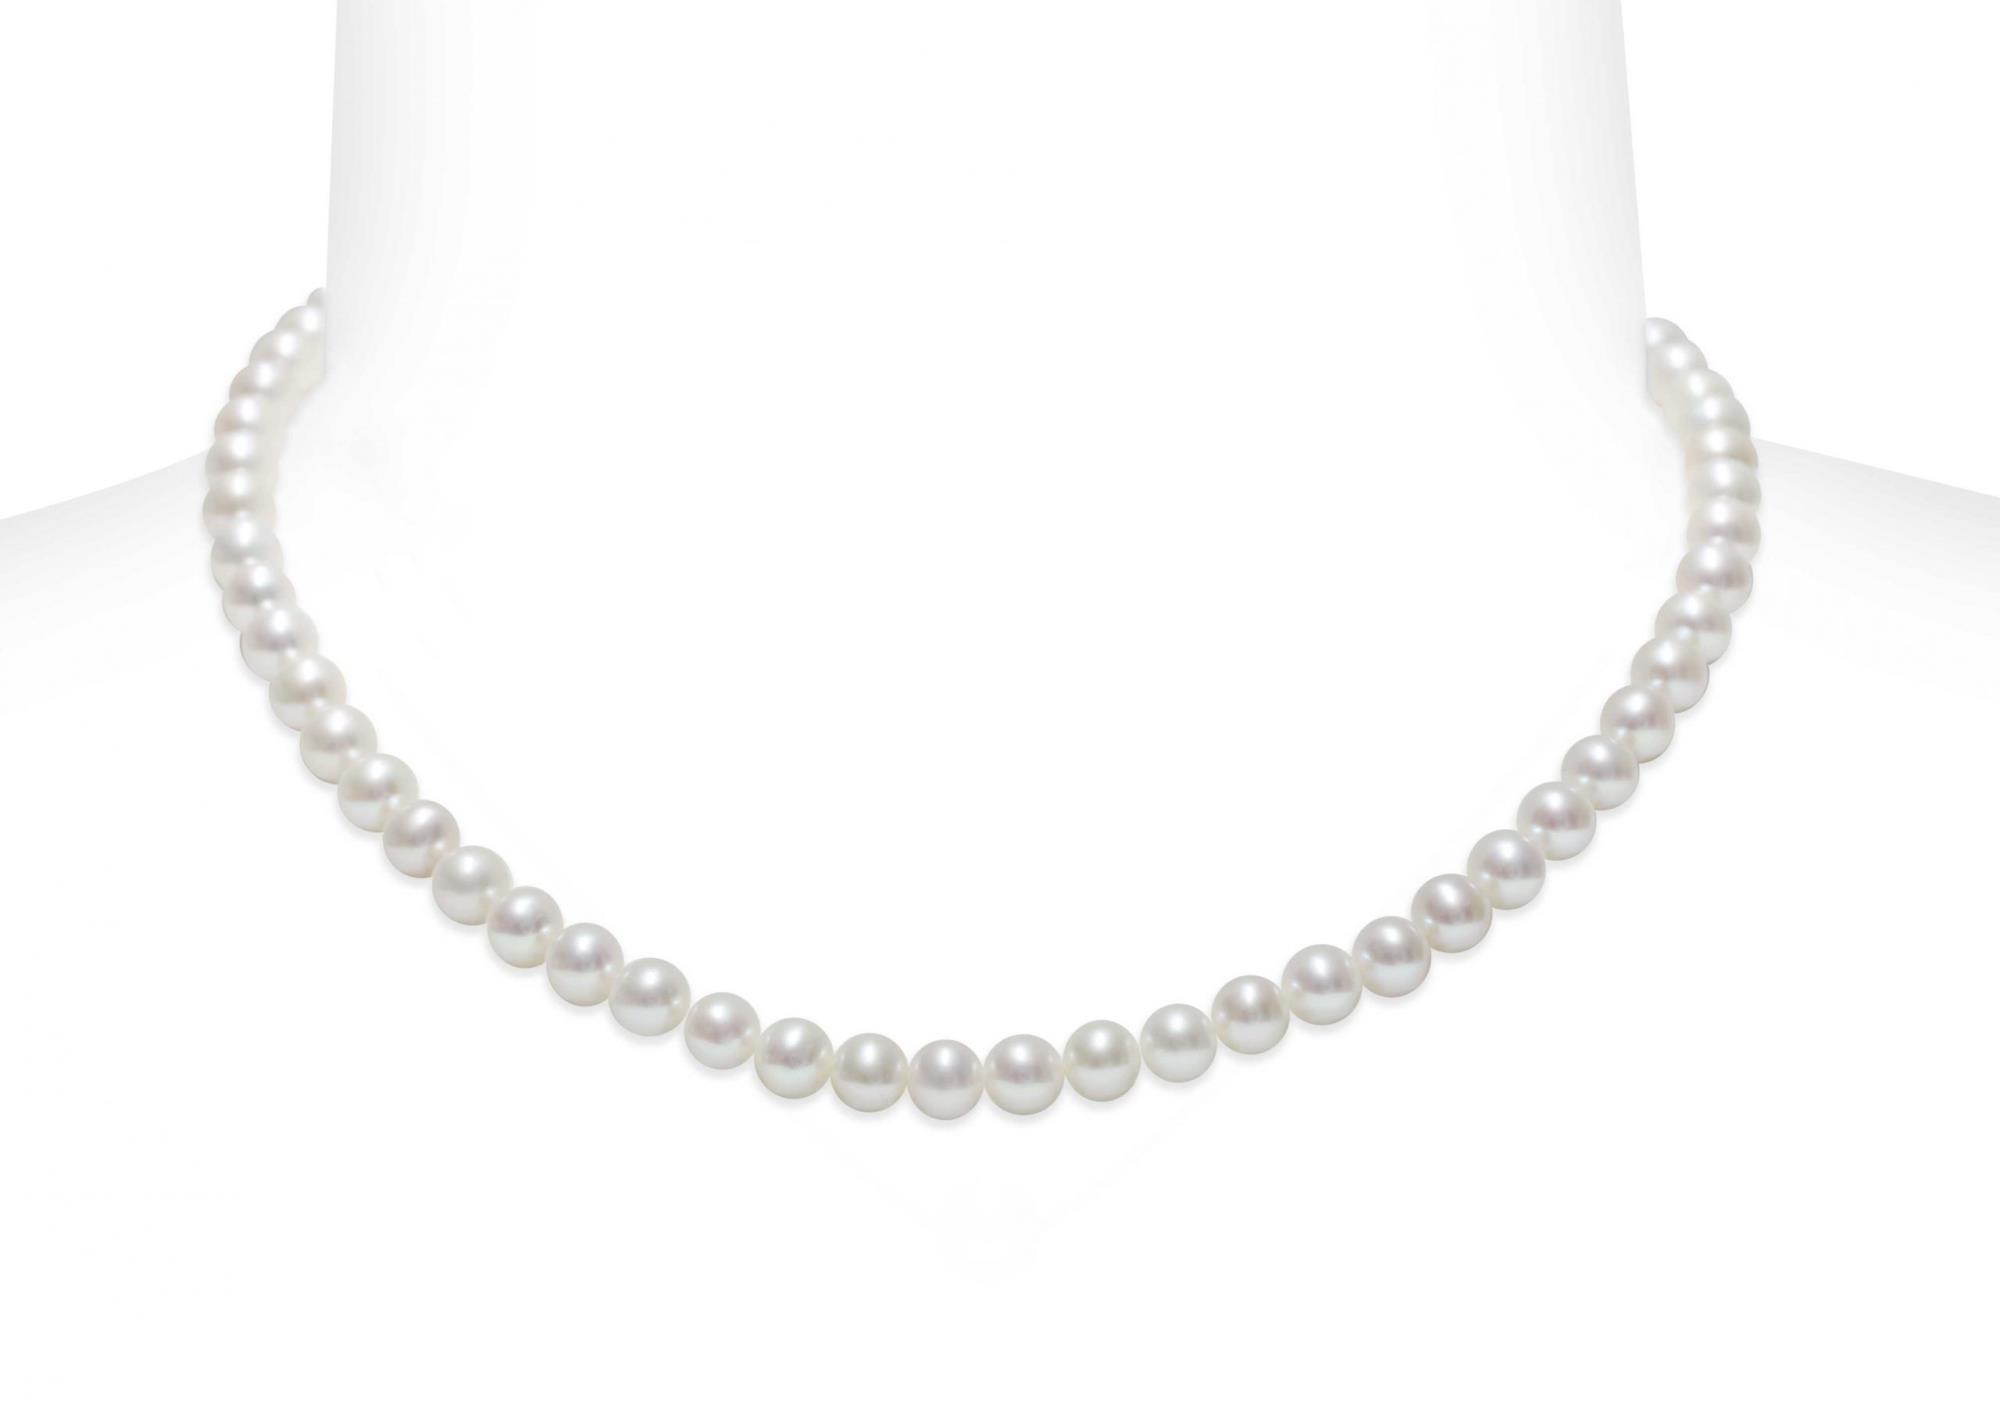 18kt white gold necklace with full pearlescent pearls - MAYUMI